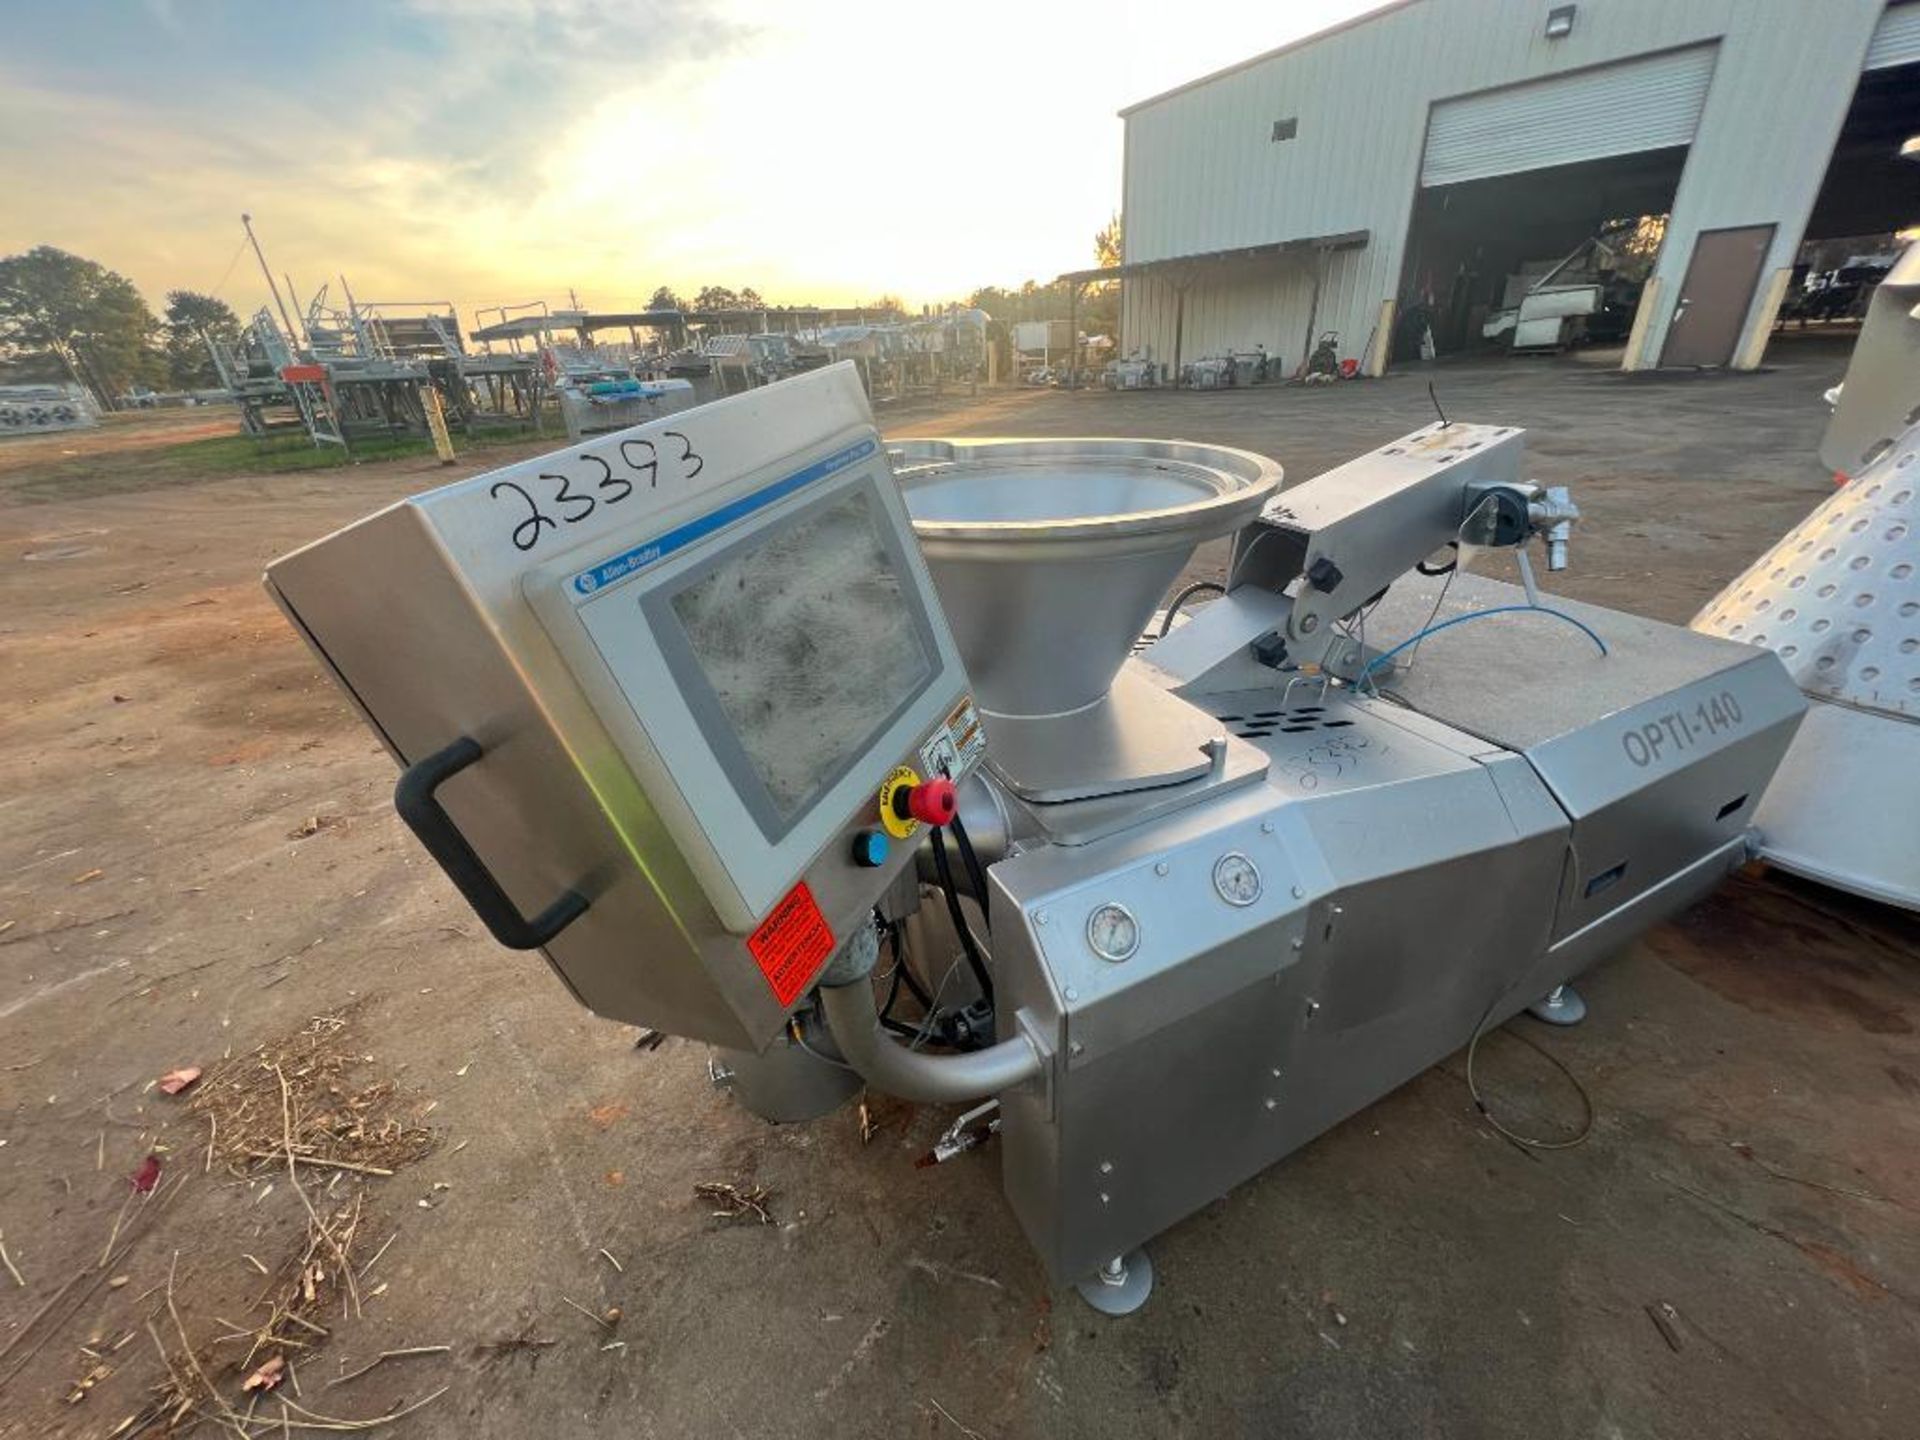 2015 Marlen meat stuffing and pumping system, model: Opti 140 pump, with dimple hopper and hydraulic - Image 19 of 32